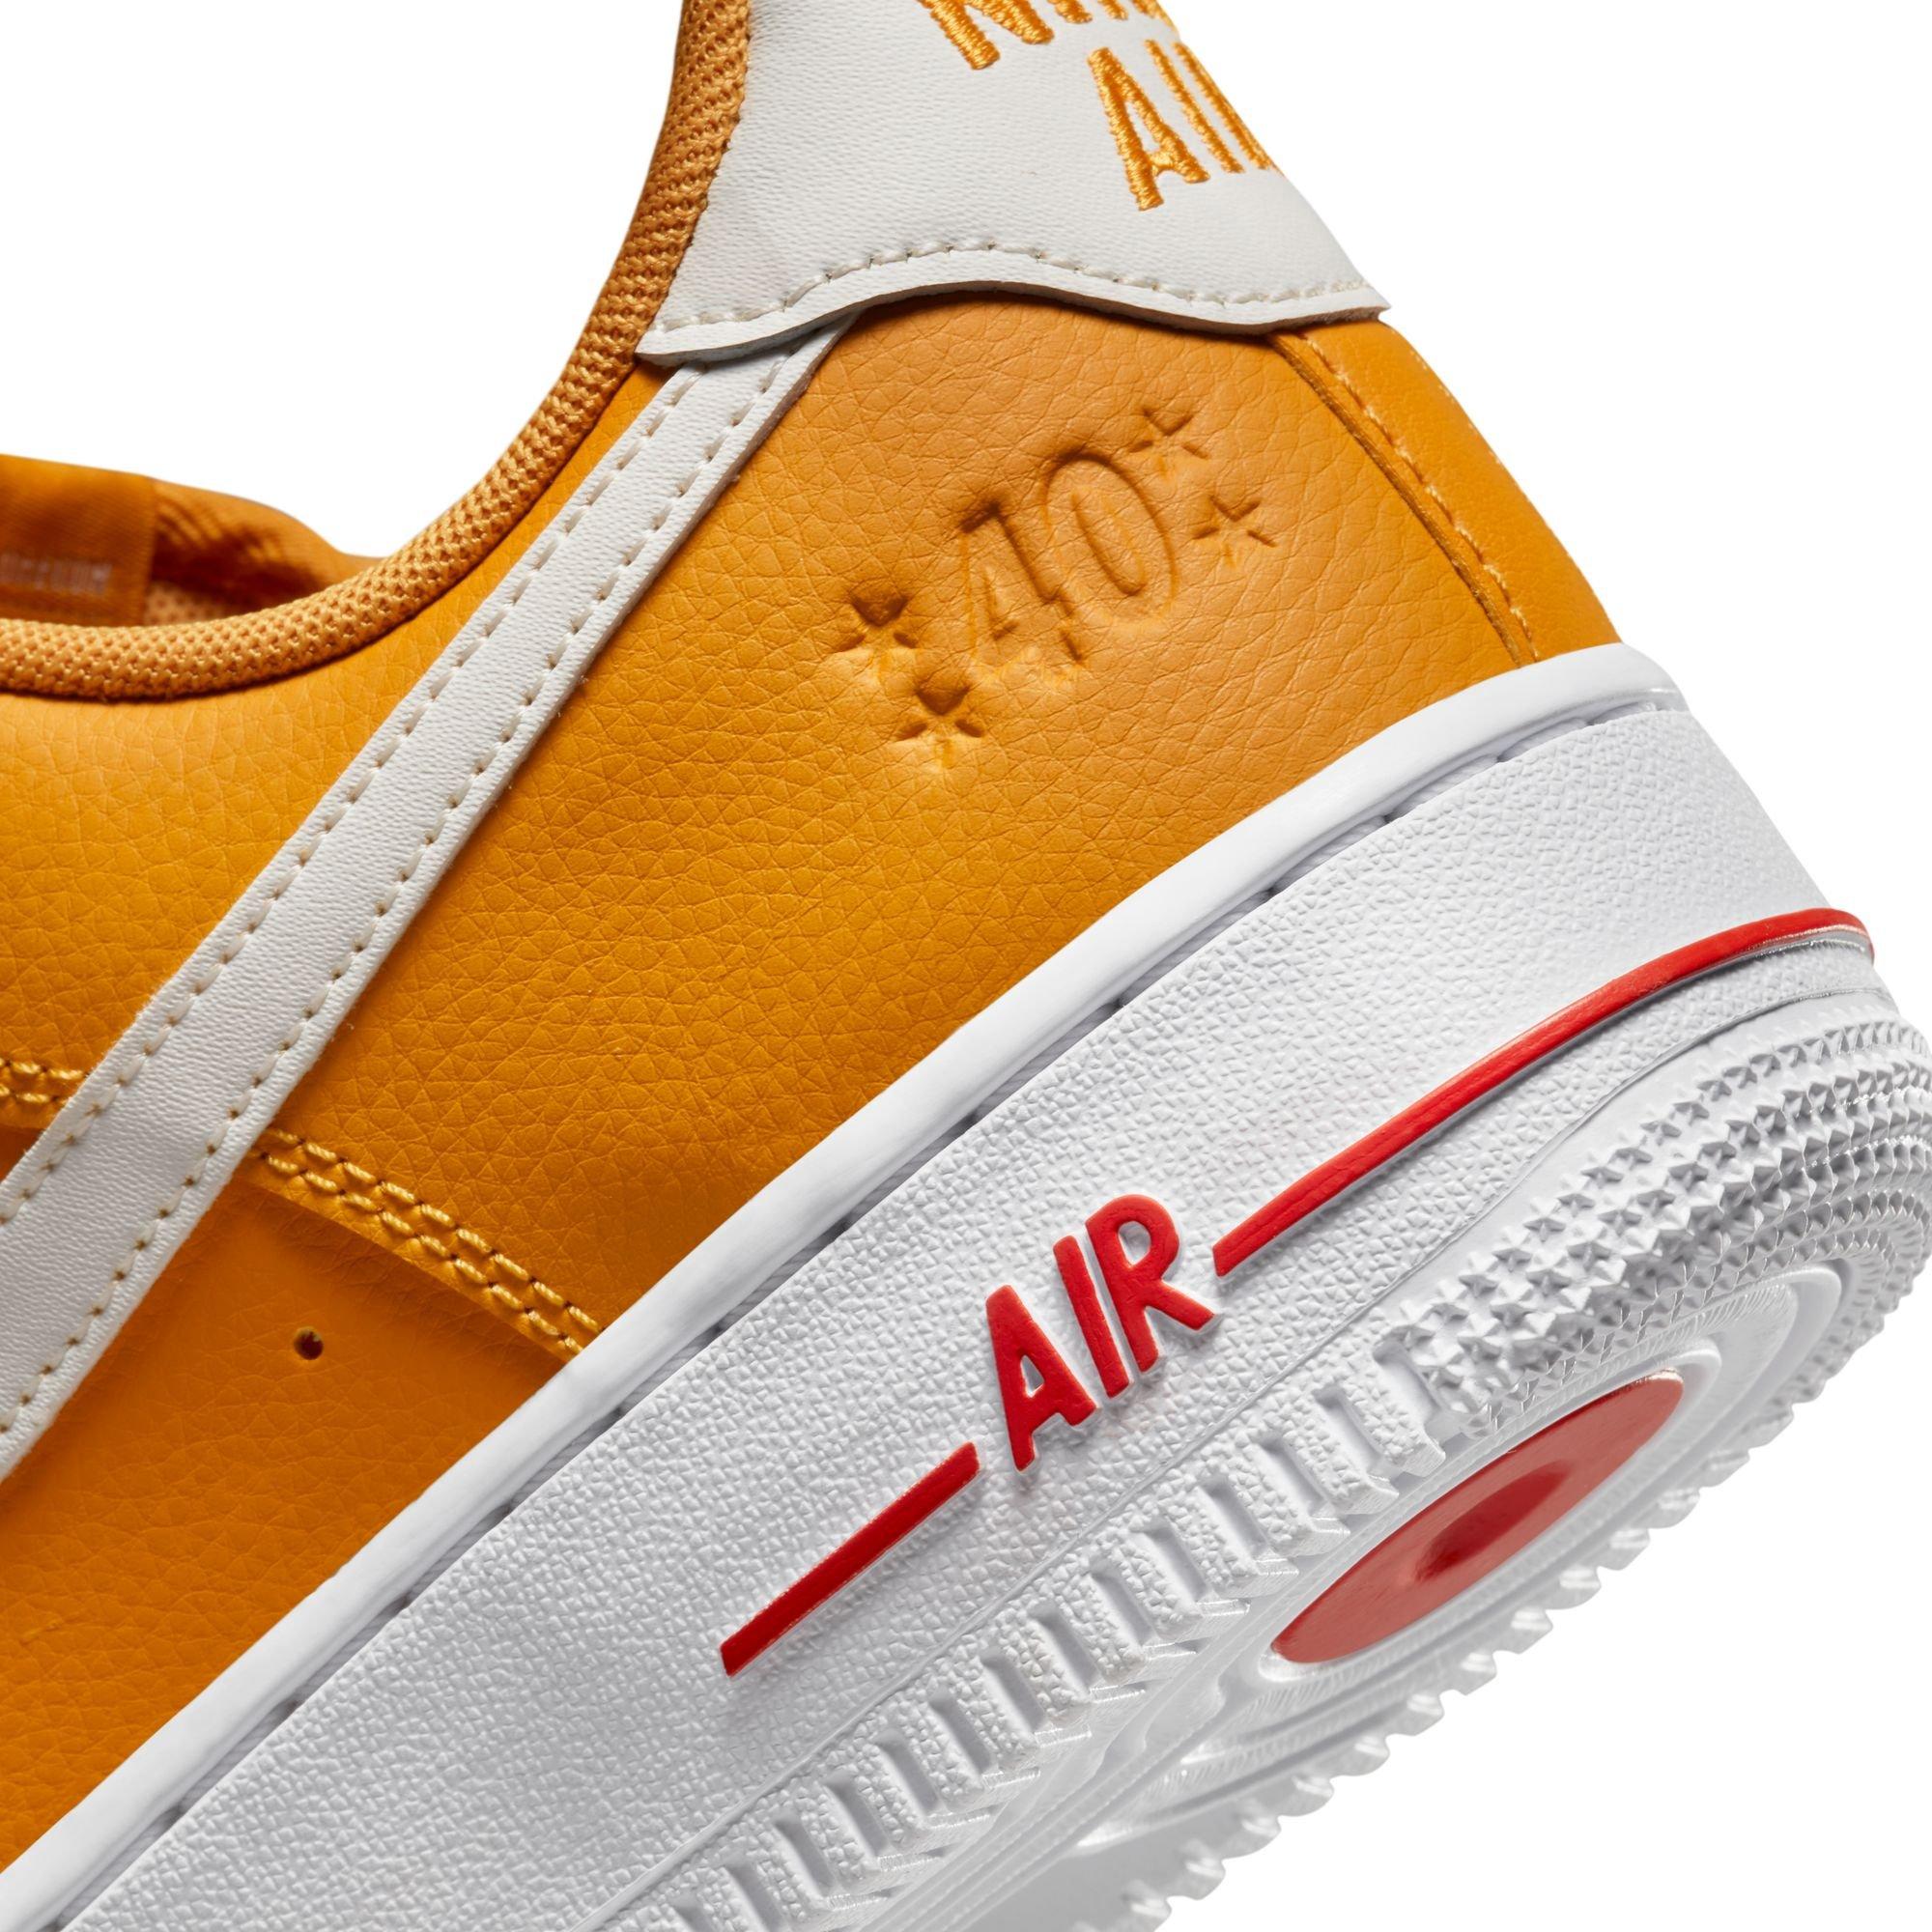 Nike Air Force 1 Sample in a Orange Yellow Colorway